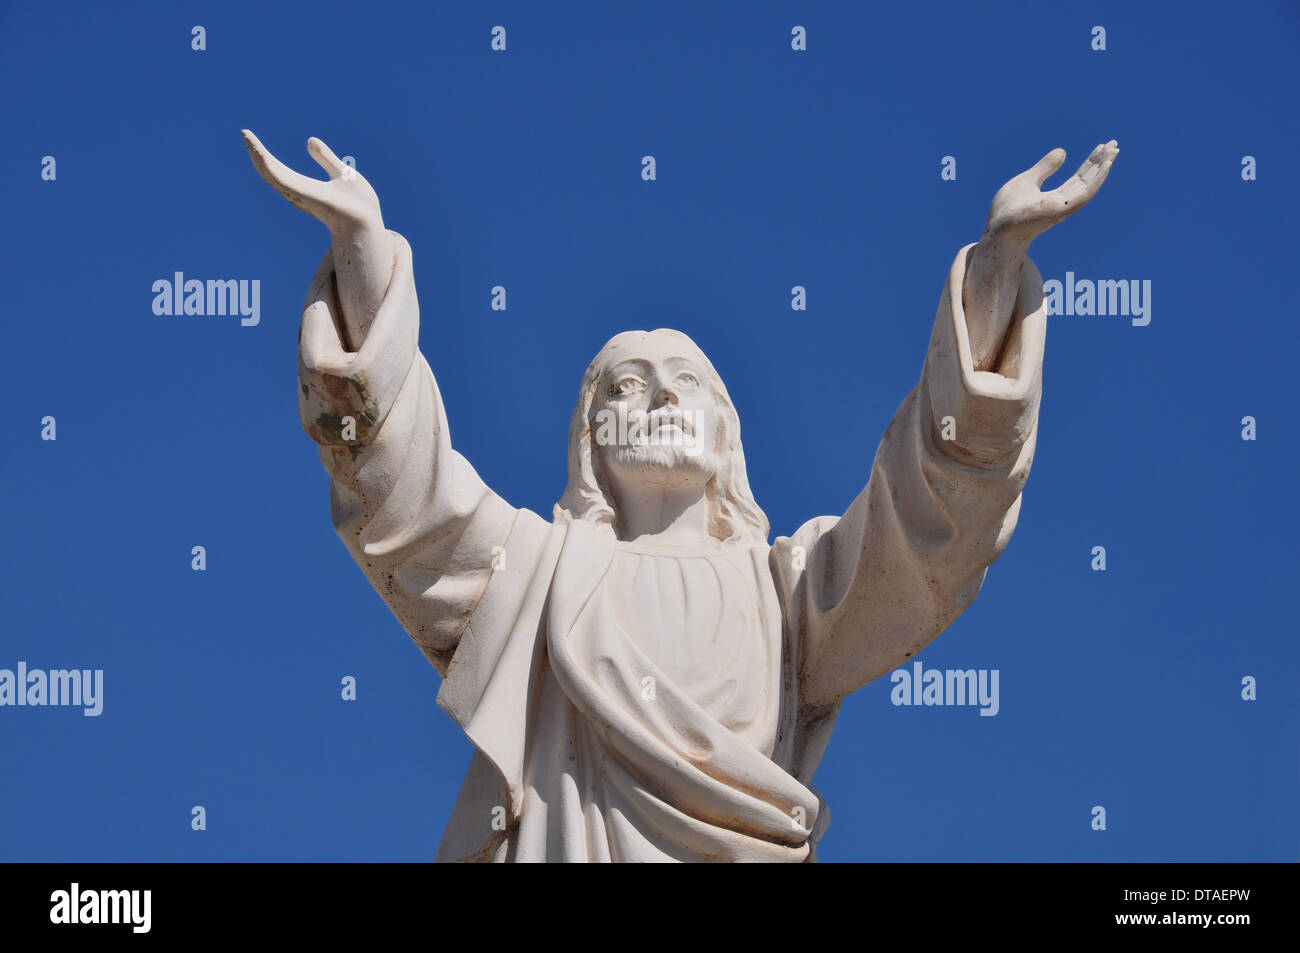 Jesus Christ with hands raised in blessing under blue sky. Marble funerary statue. Stock Photo